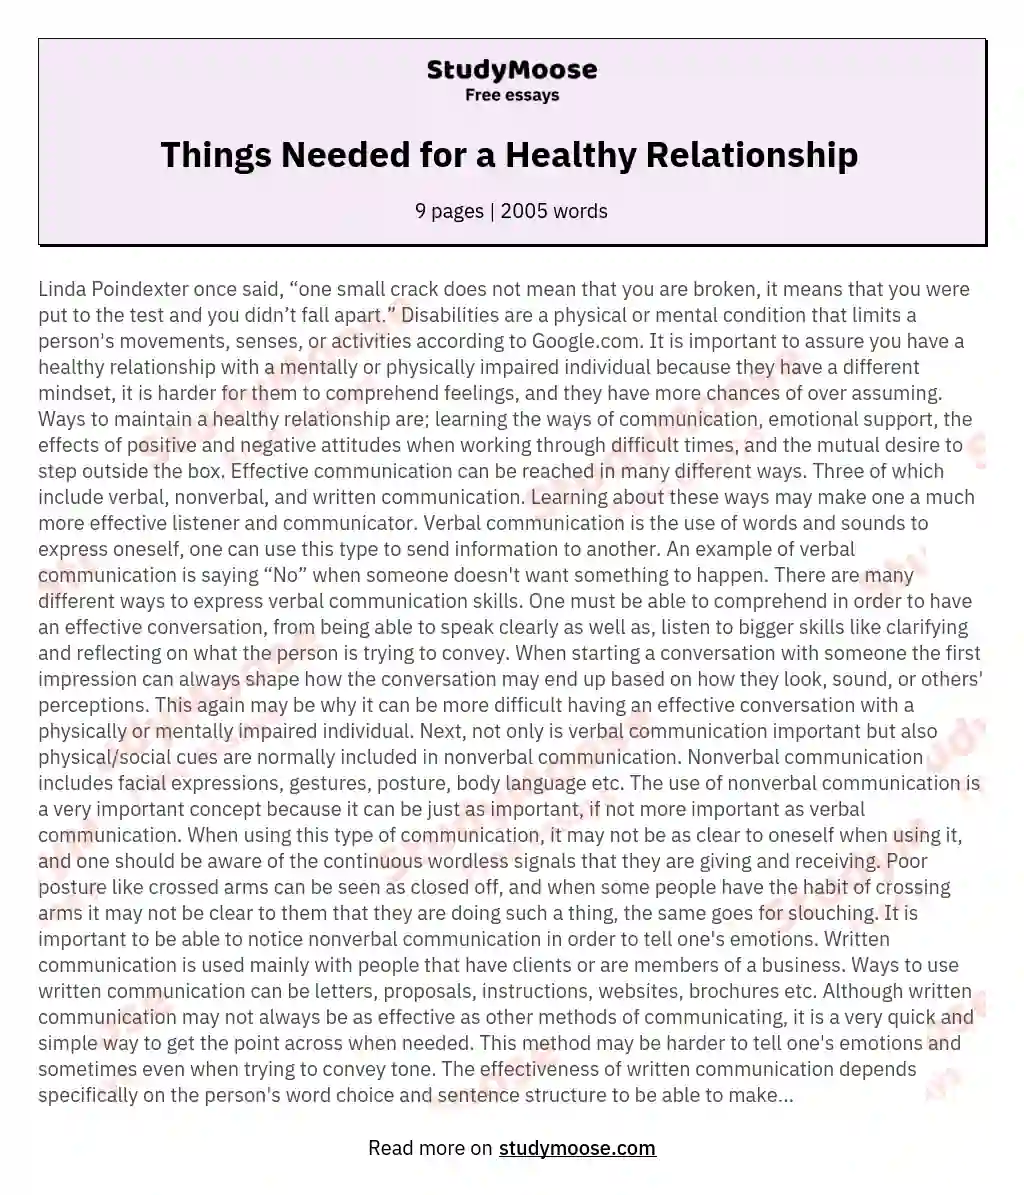 Things Needed for a Healthy Relationship  essay